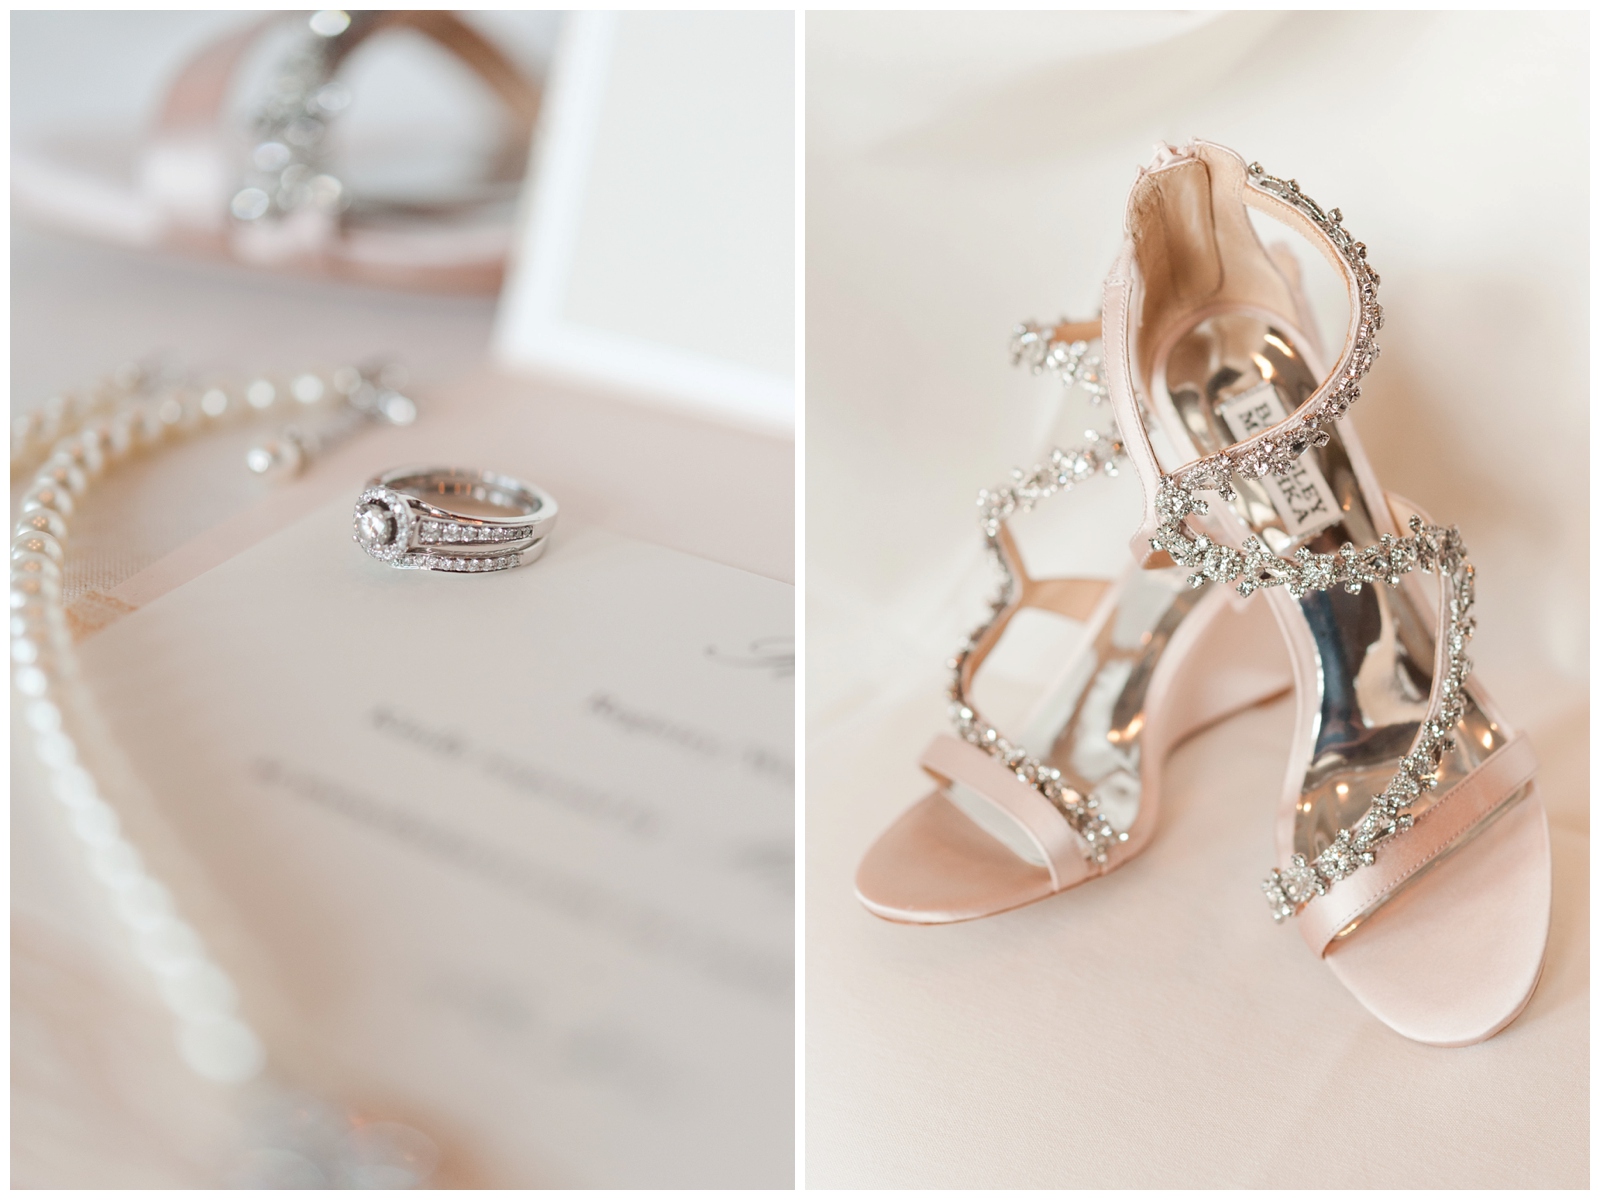 bridal details of badgley mischka shoes and wedding rings on a wedgewood golf and country club wedding invitation 